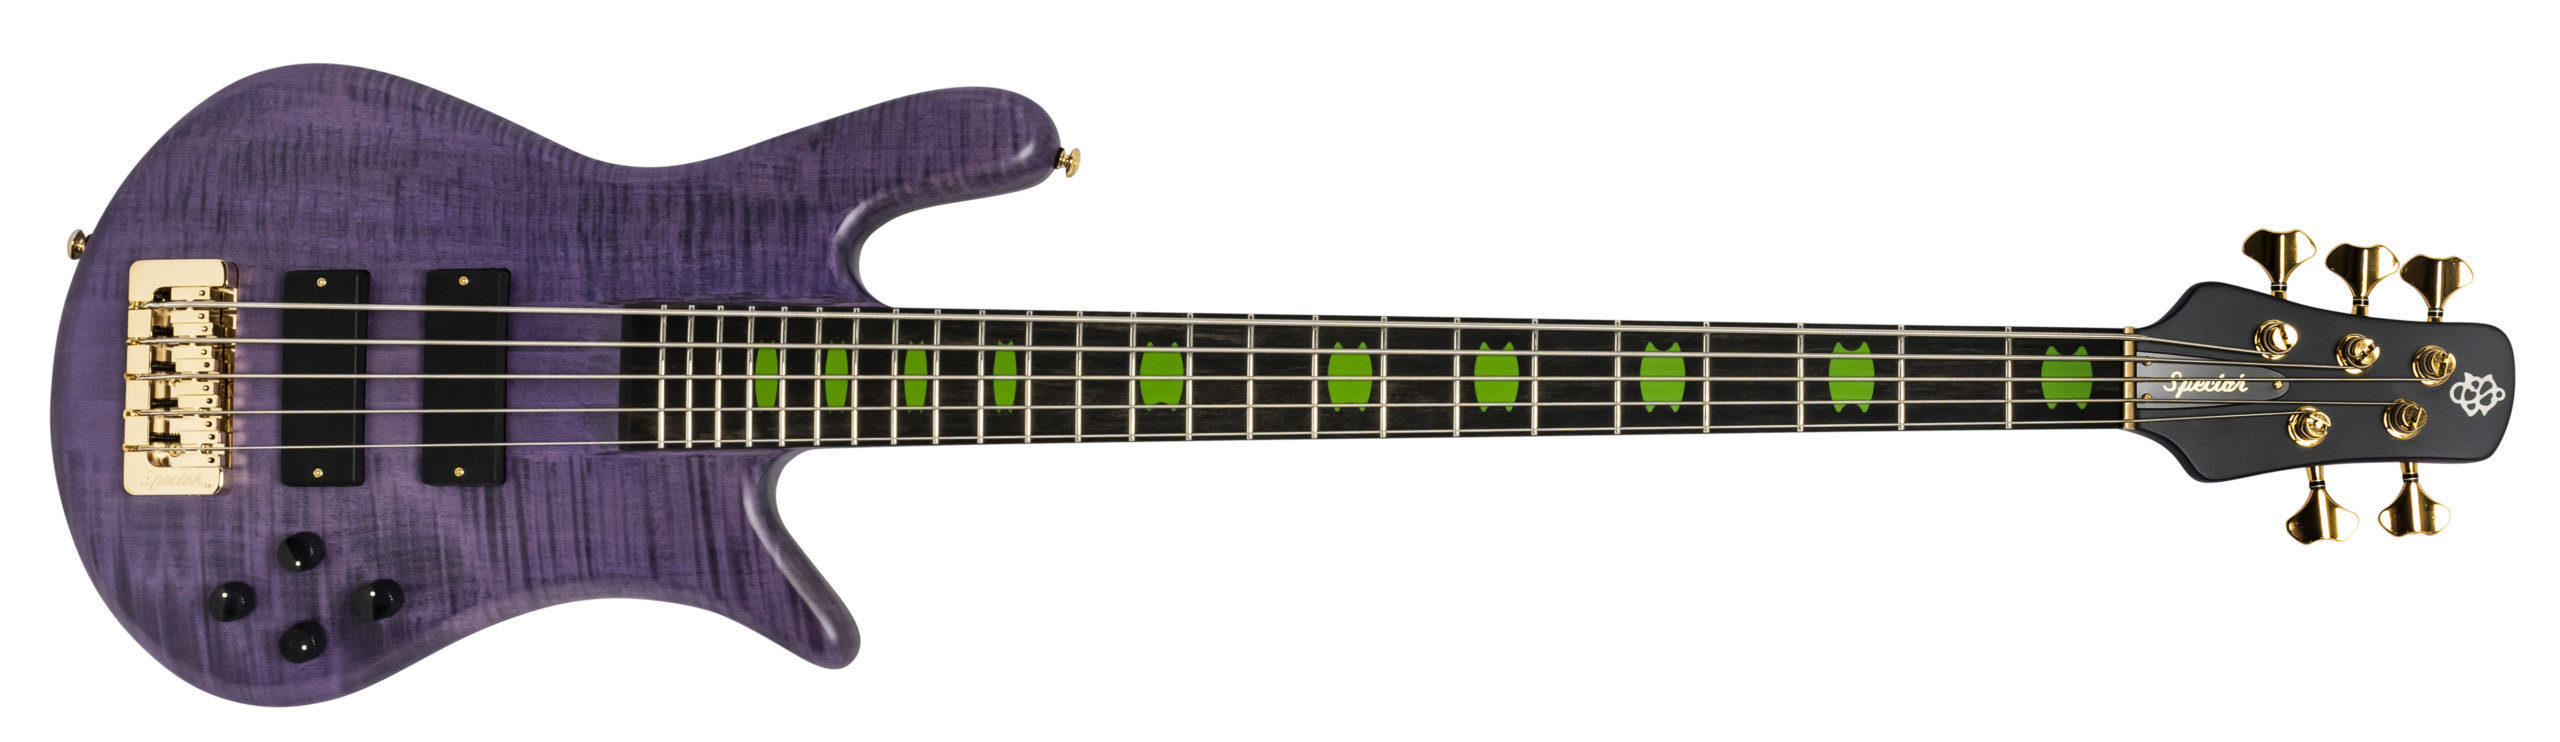 front of purple bass